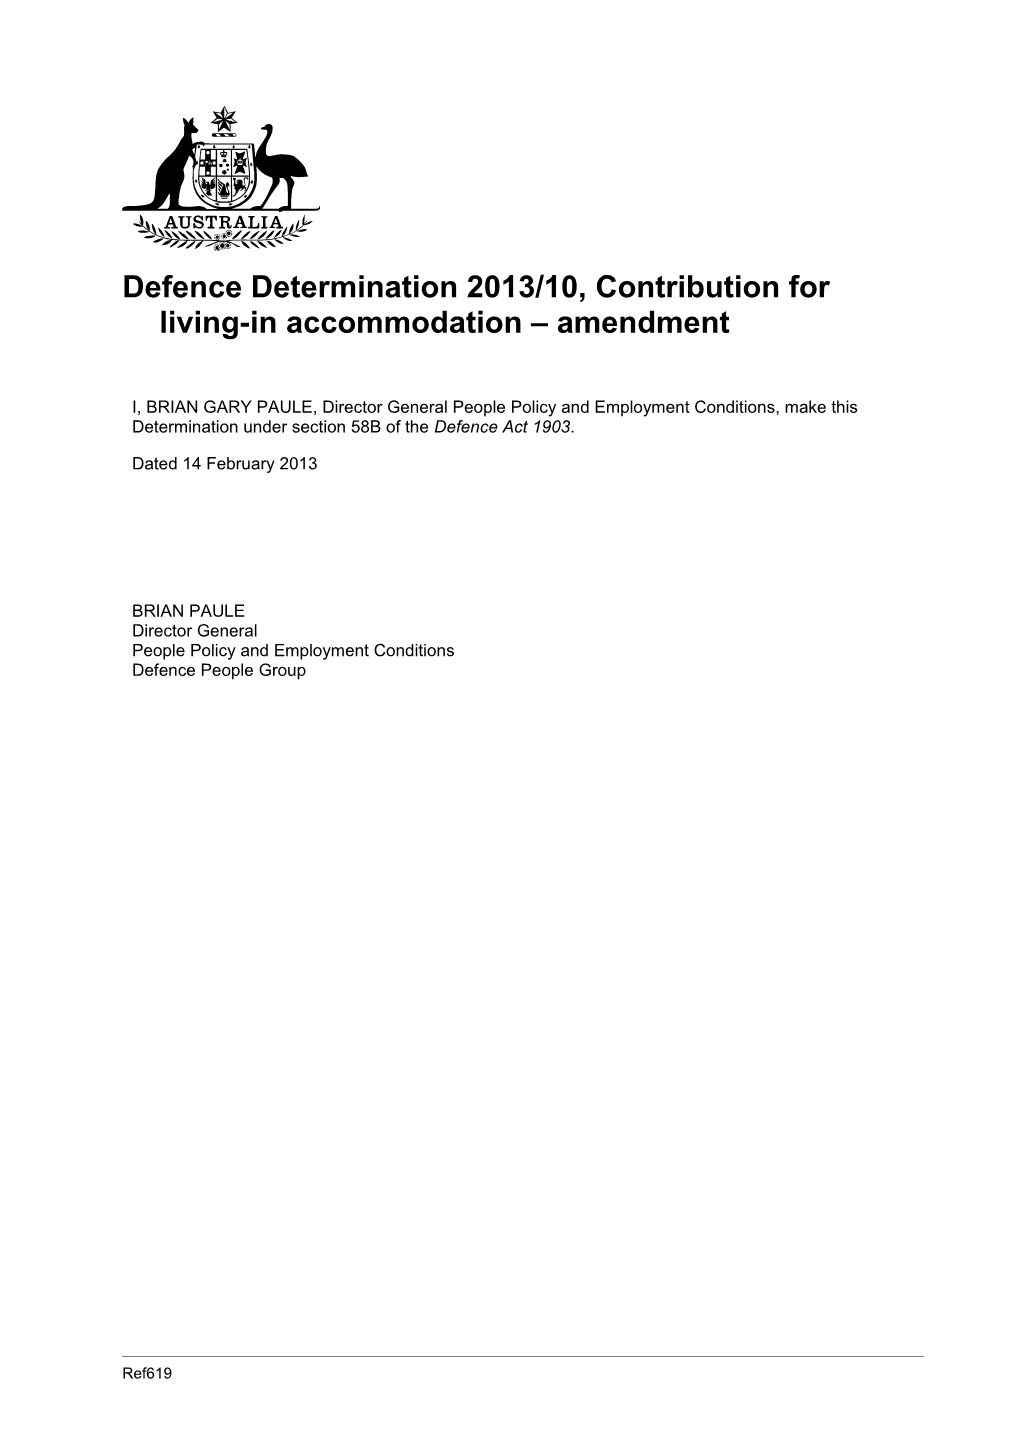 Defence Determination 2013/10, Contribution for Living-In Accommodation Amendment